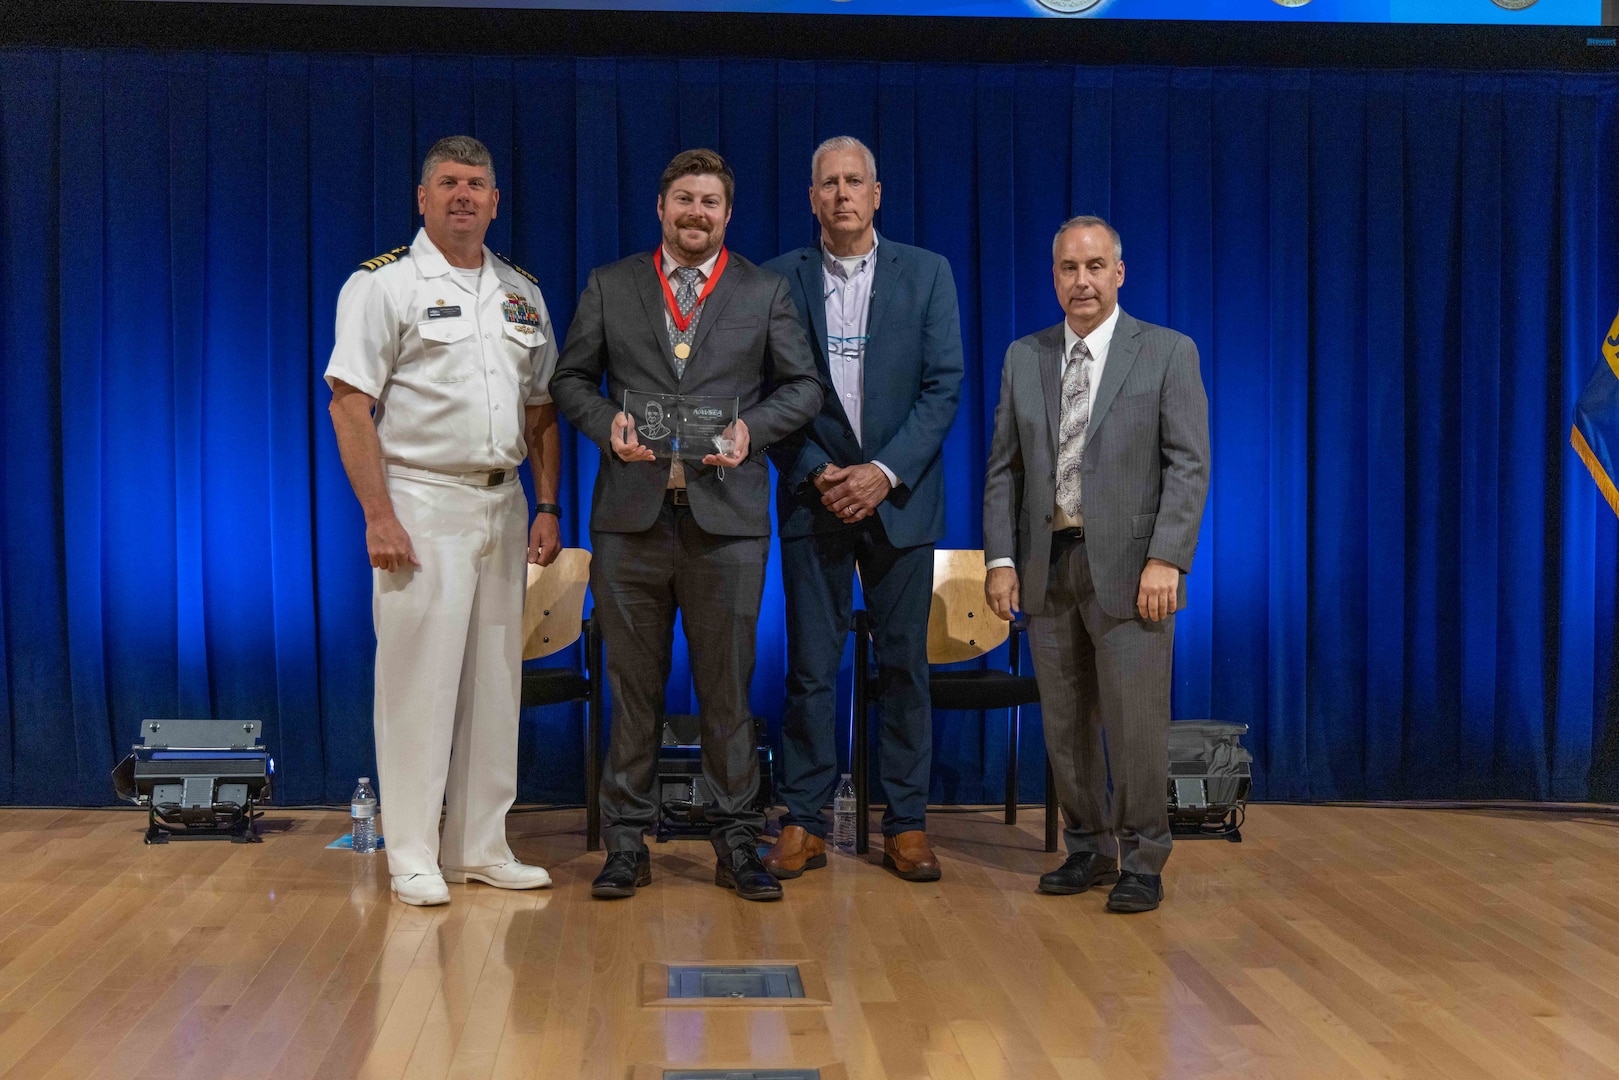 Naval Surface Warfare Center, Carderock Division's Commanding Officer Capt. Matthew Tardy (left), Technical Director Larry Tarasek (right) and Michael Brown (second to right), the Naval Architecture and Engineering Department Head, present the Capt. Harold E. Saunders Award for Exemplary Technical Management to Jayson Geiser, the Submarine Propulsor Production Manager in Carderock’s Advanced Propulsor Management Office, during Carderock's Magnificent Eight Award ceremony in West Bethesda, Md., on June 13. (U.S. Navy photo by Aaron Thomas)